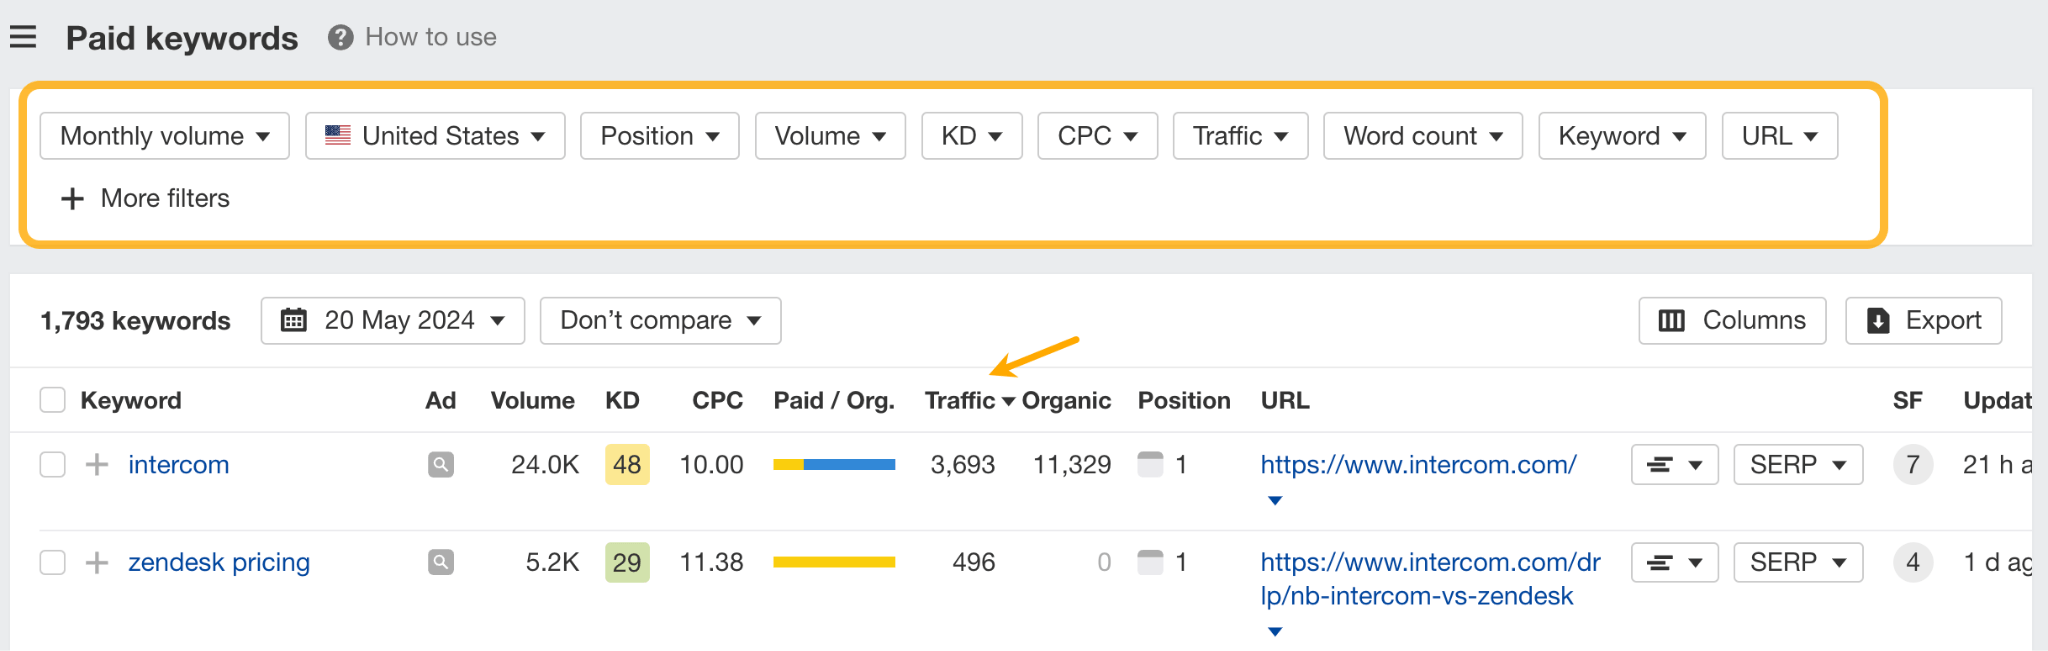 filters-in-paid-keywords-report- 15 Unique Ways to Check Competitor Website Traffic